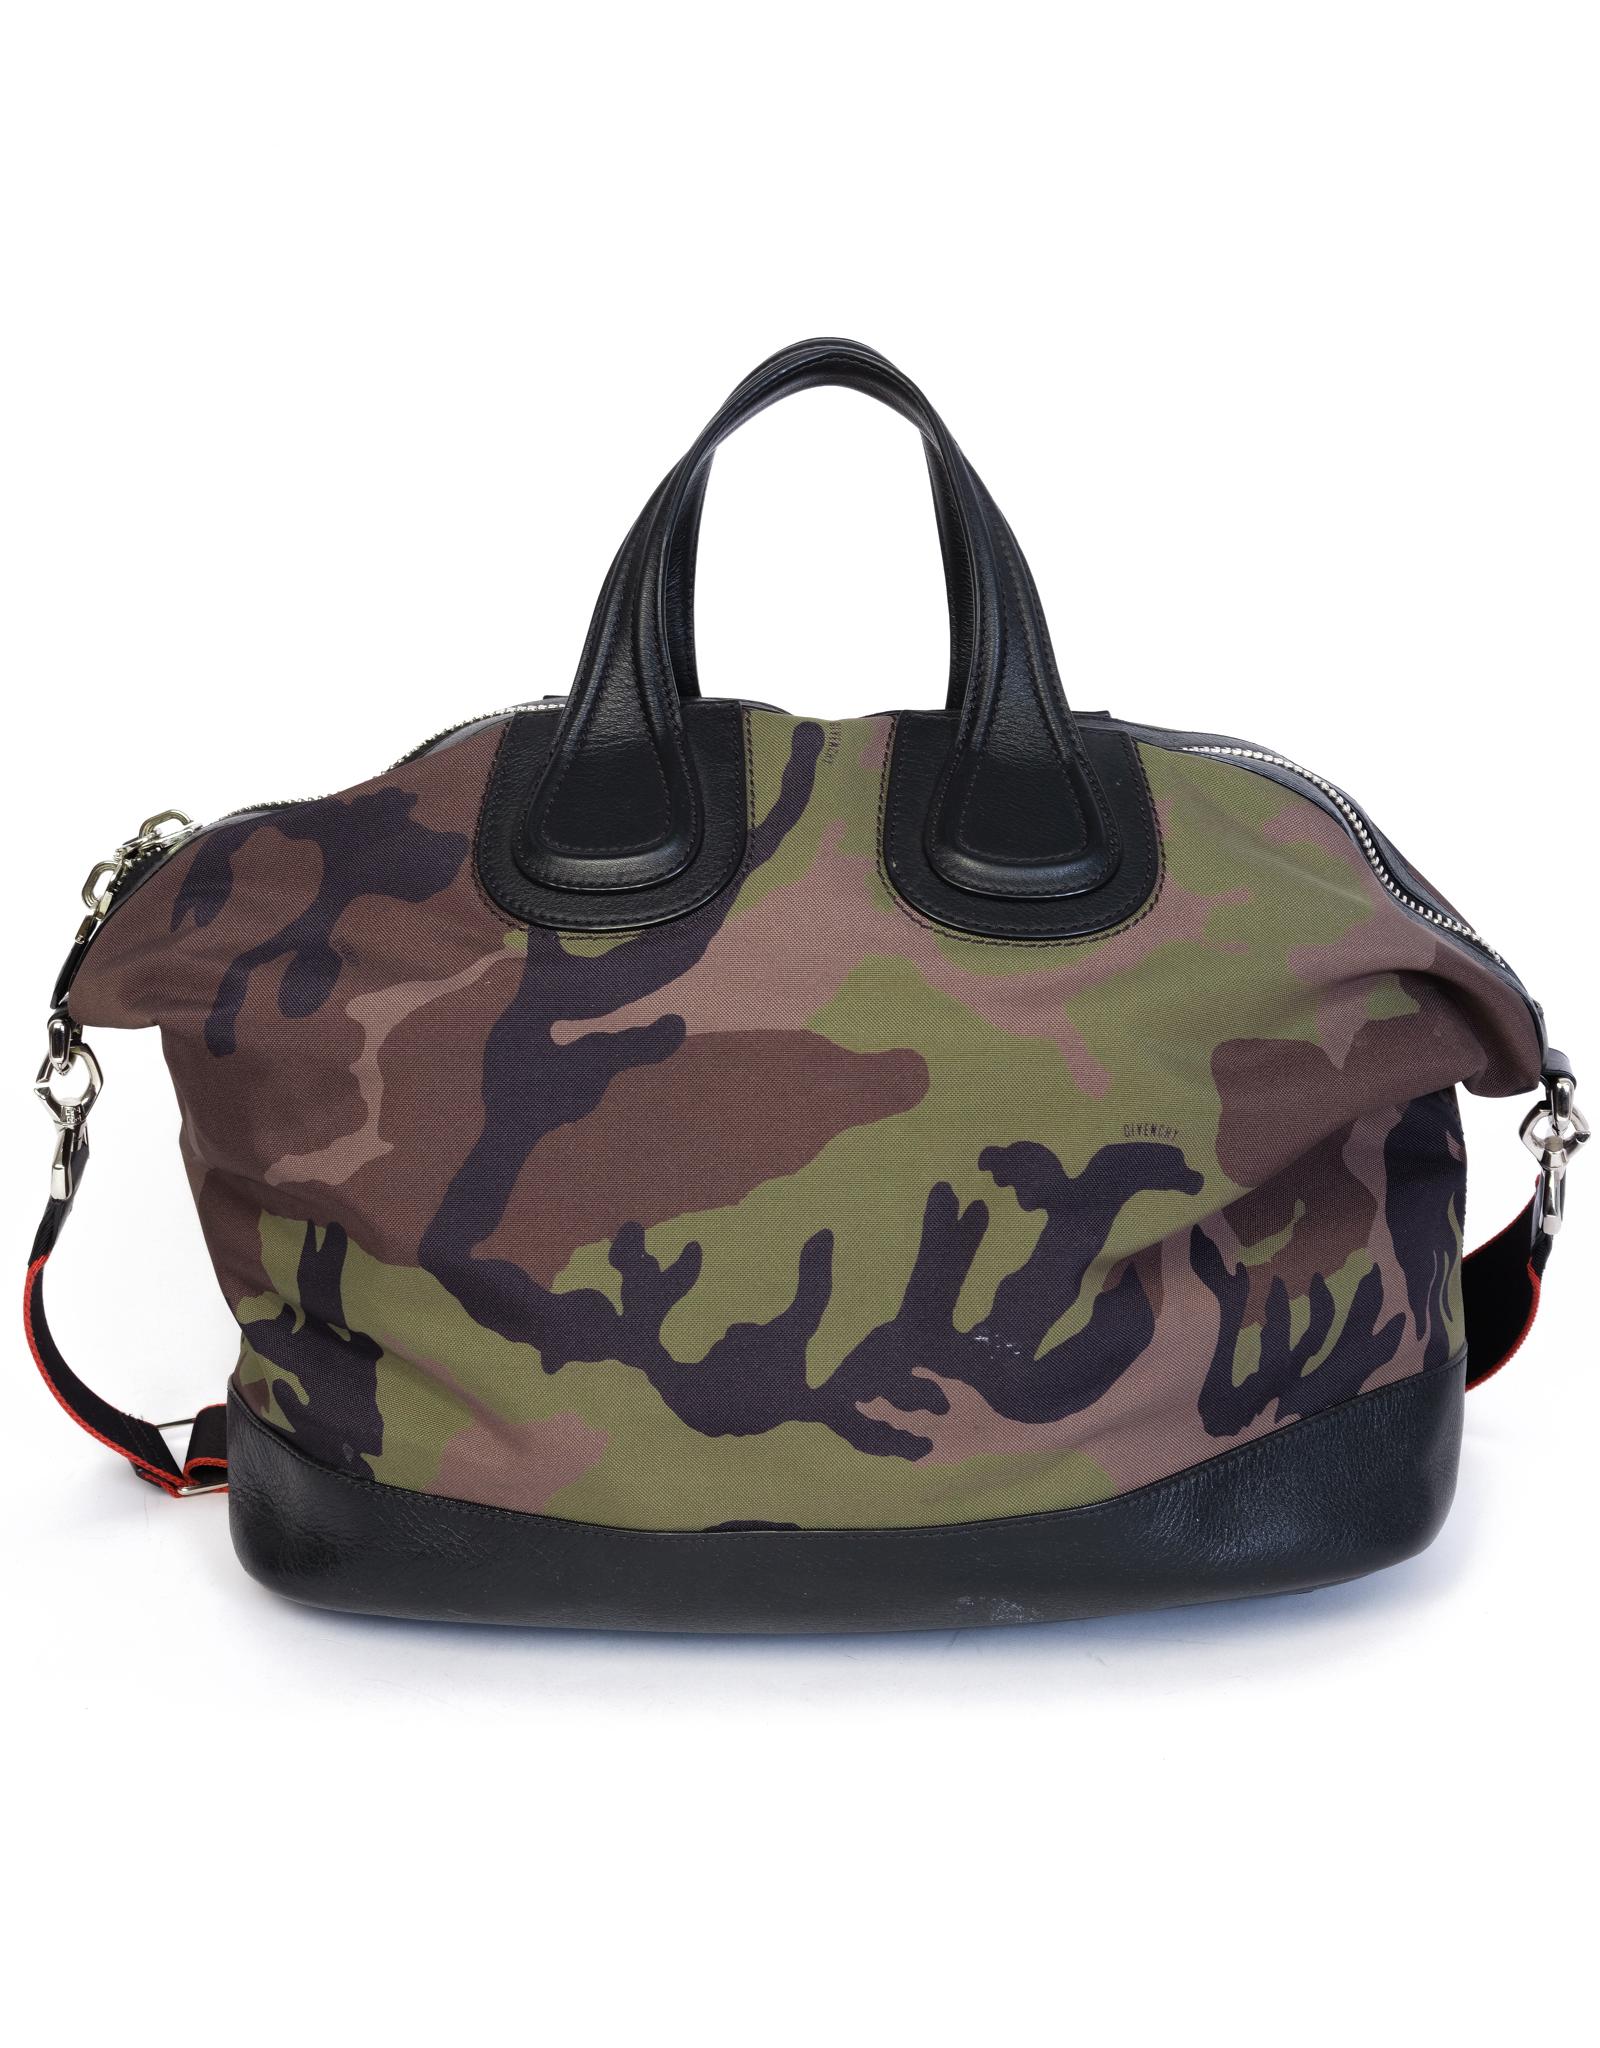 Nylon tote featuring camouflage pattern in tones of black, brown & green. Black faux-leather trim throughout. Twin carry handles at top & branded adjustable crossbody strap.

COLOR: Camo
MATERIAL: Nylon with leather finishes
ITEM CODE: MAD